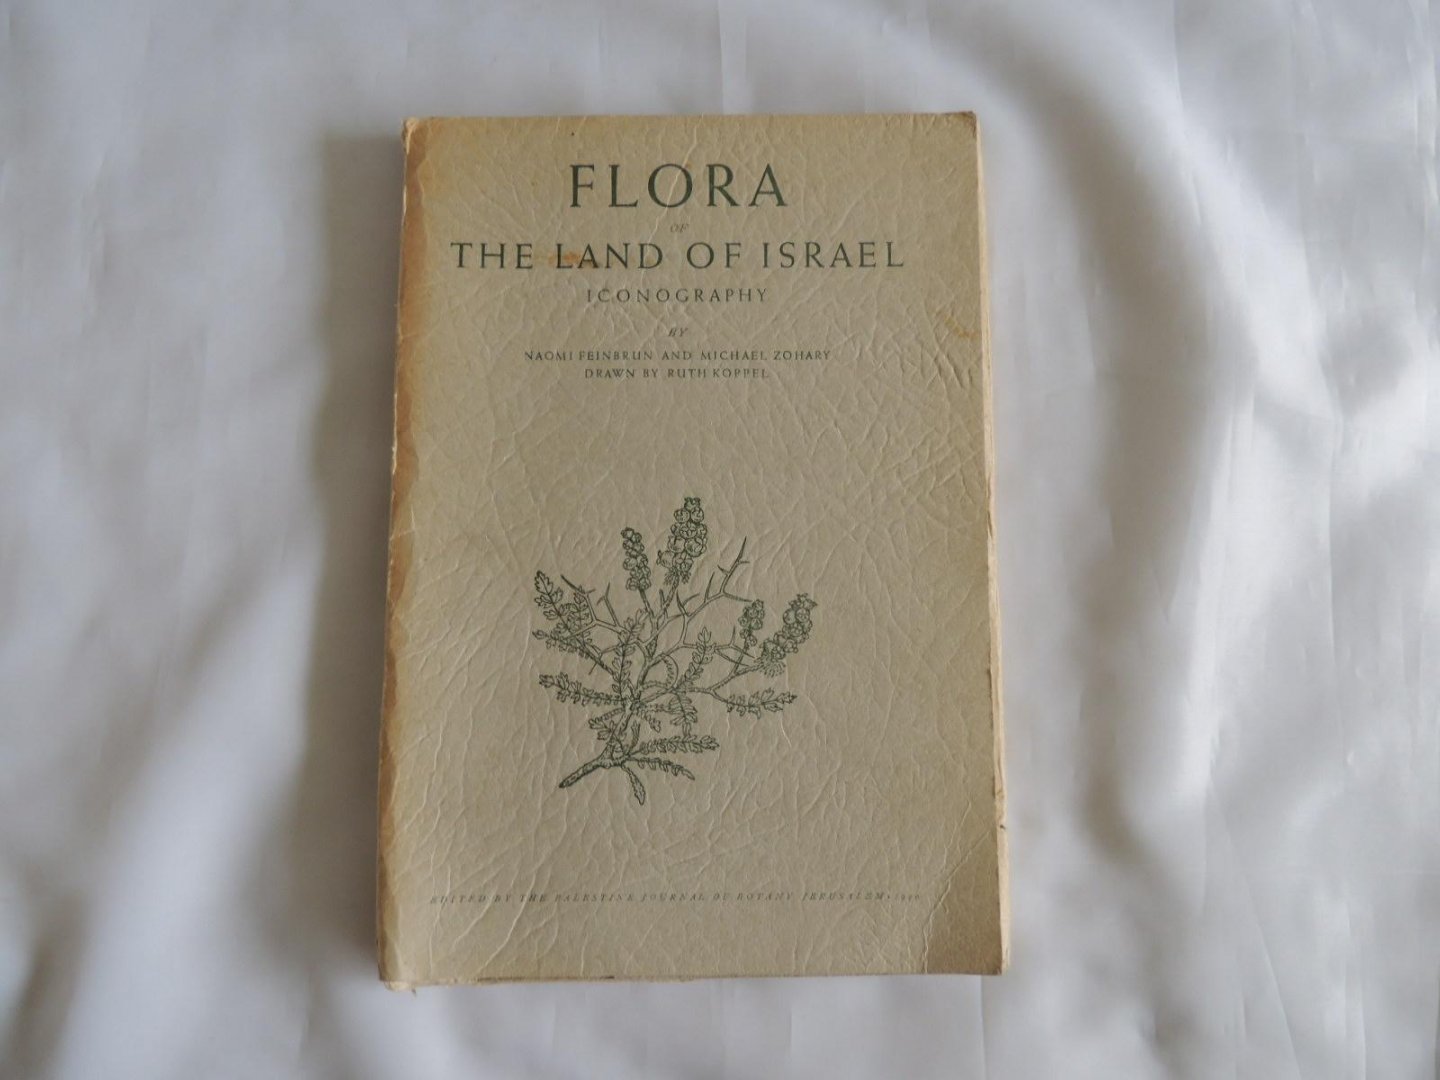 Naomi Zohary; Michael Zohary; Ruth Koppel - Hebrew University - Flora of the land of Israel - iconography - Plates 1 - 50 complete